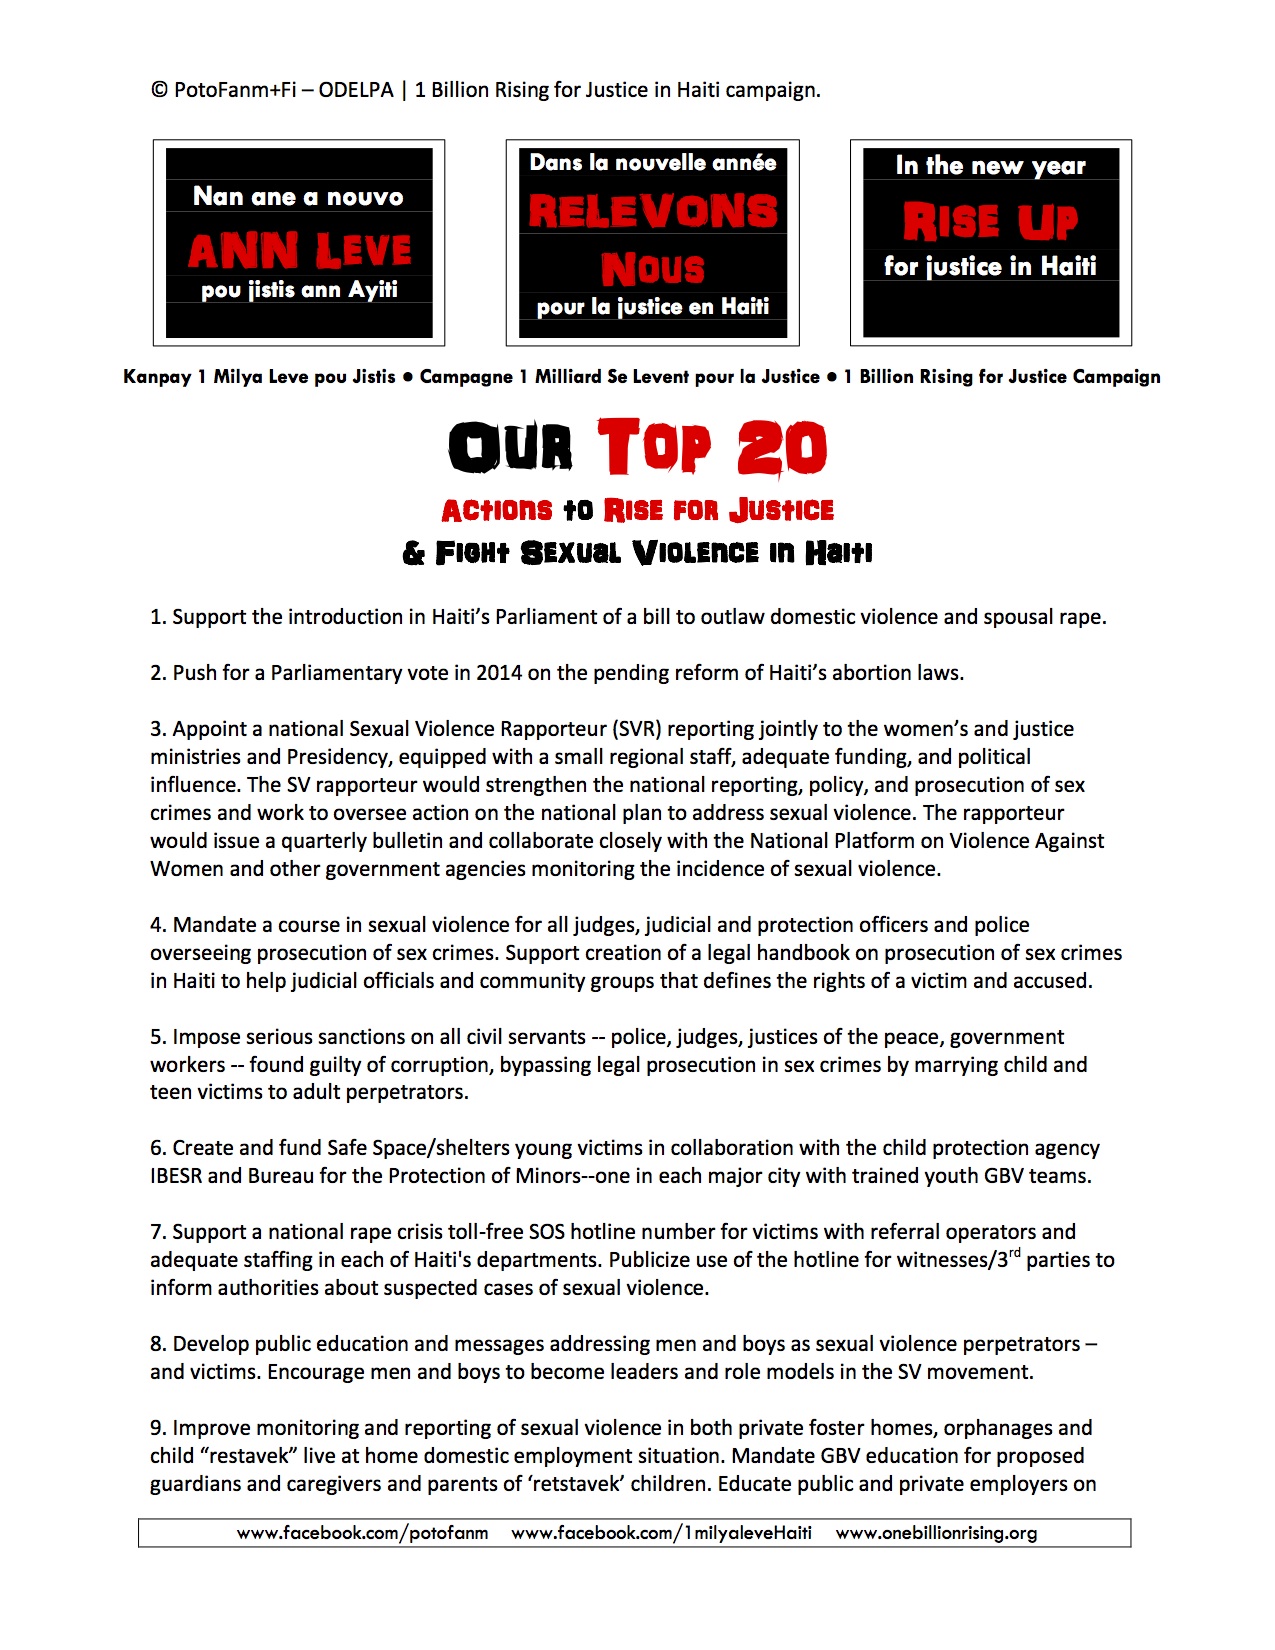 20 Actions to Rise for Justice flyer - ENG[5]